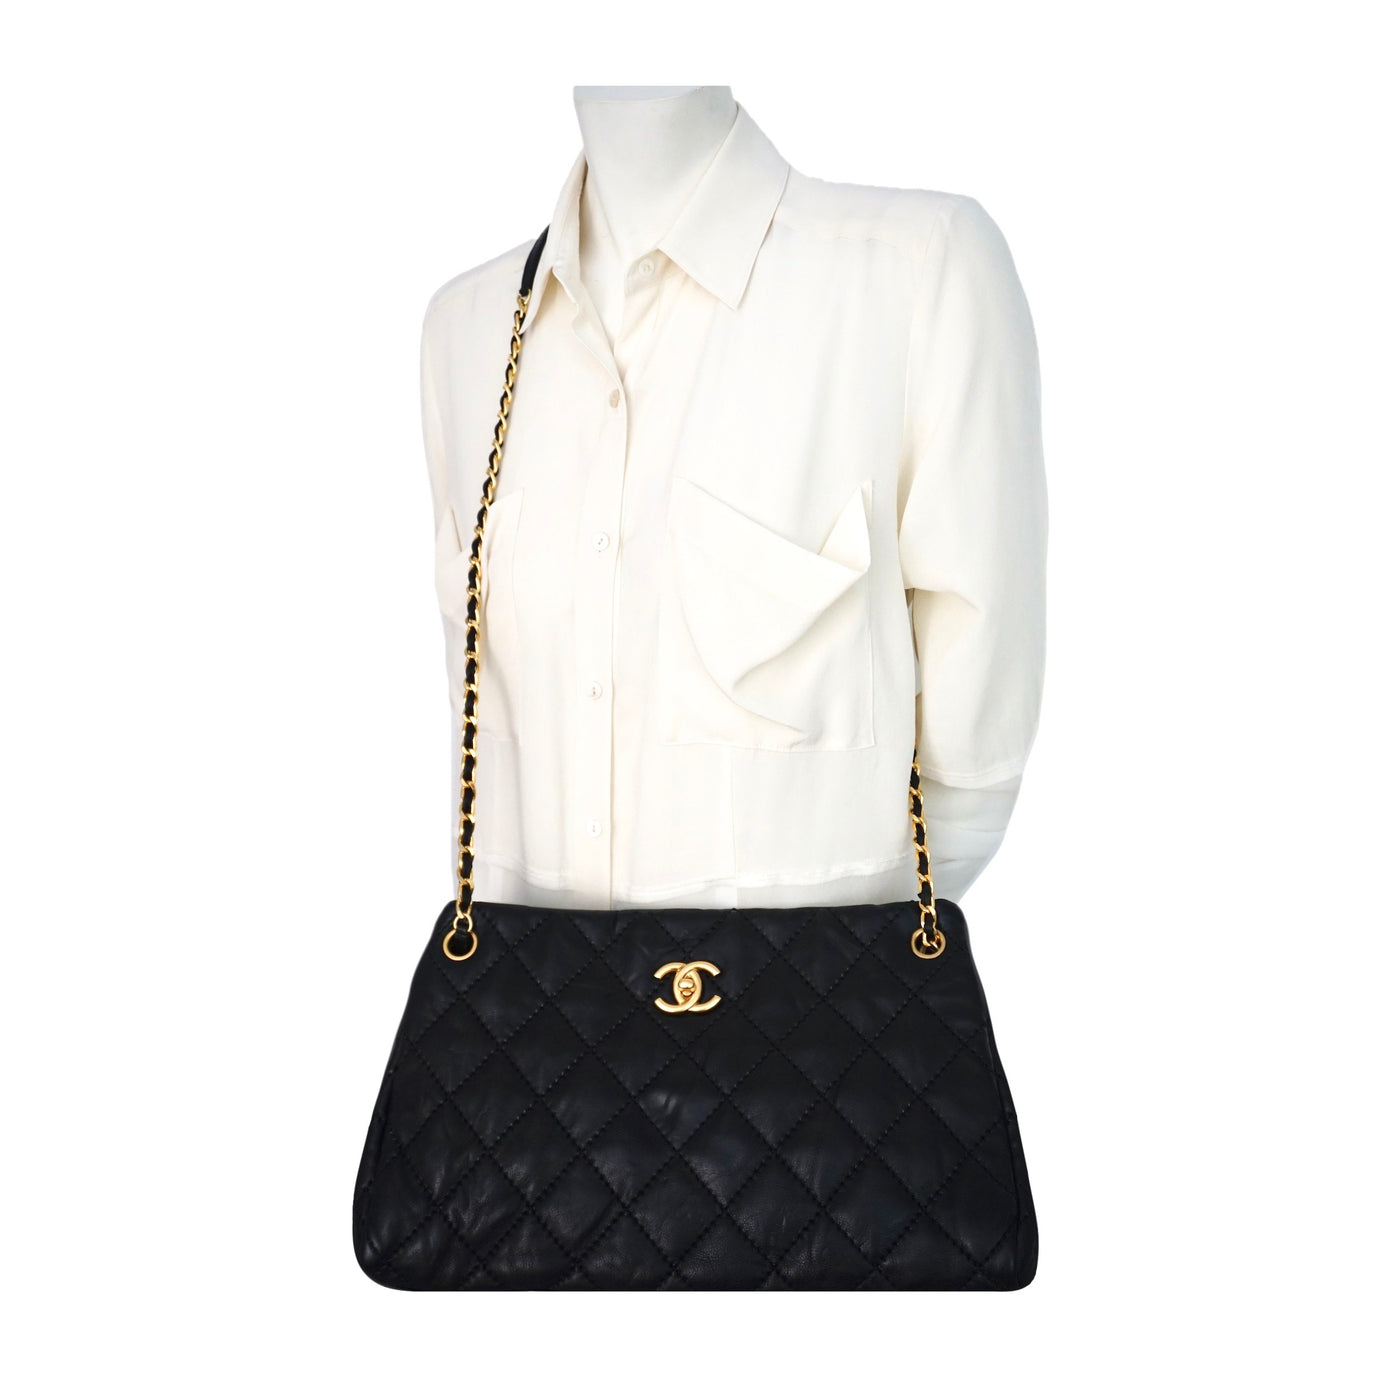 Authentic Chanel Black Calfskin Modern Quilted Tote